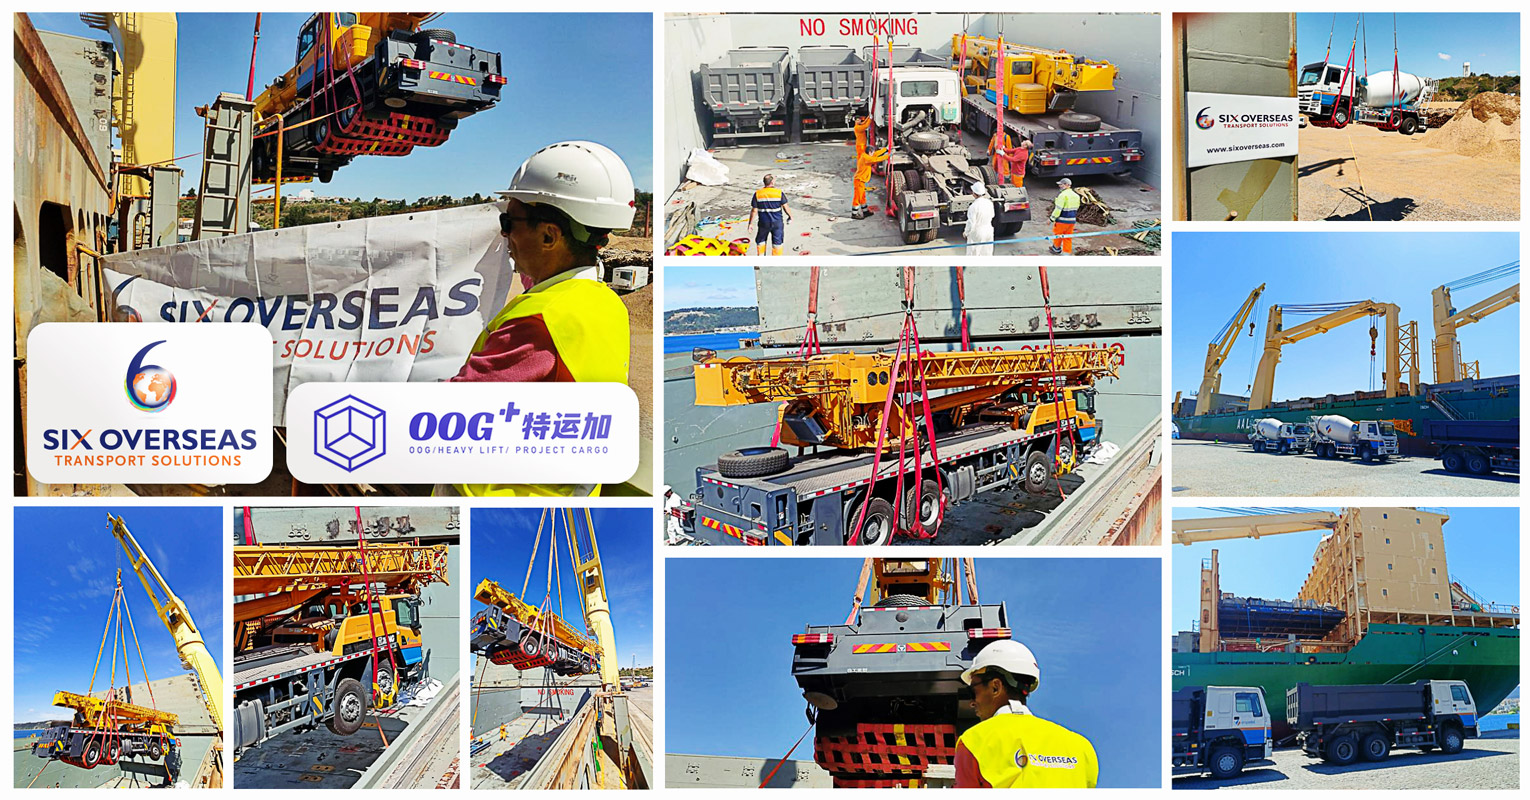 Six Overseas Portugal & OOG+ Cooperated to Transport 8 Construction Trucks Including a 50mt Crane Truck